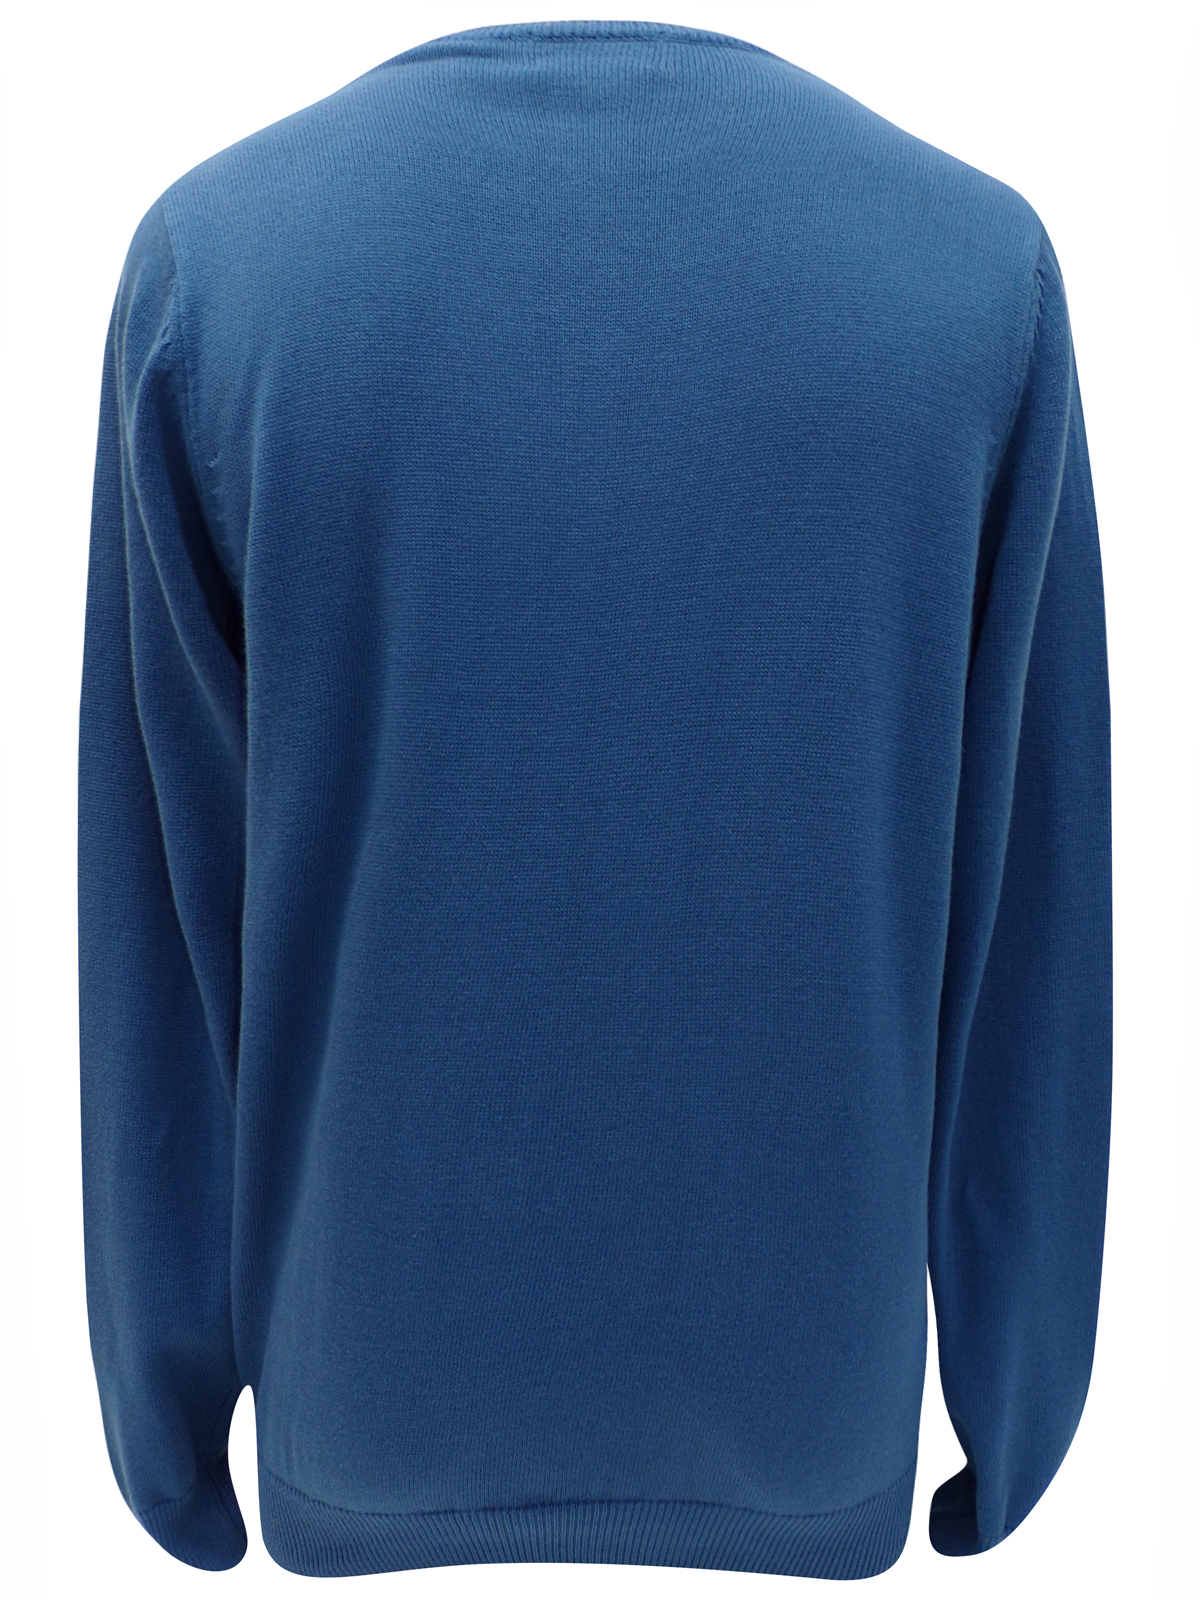 Marks and Spencer - - M&5 PETROL Pure Cotton Long Sleeve Jumper - Size ...